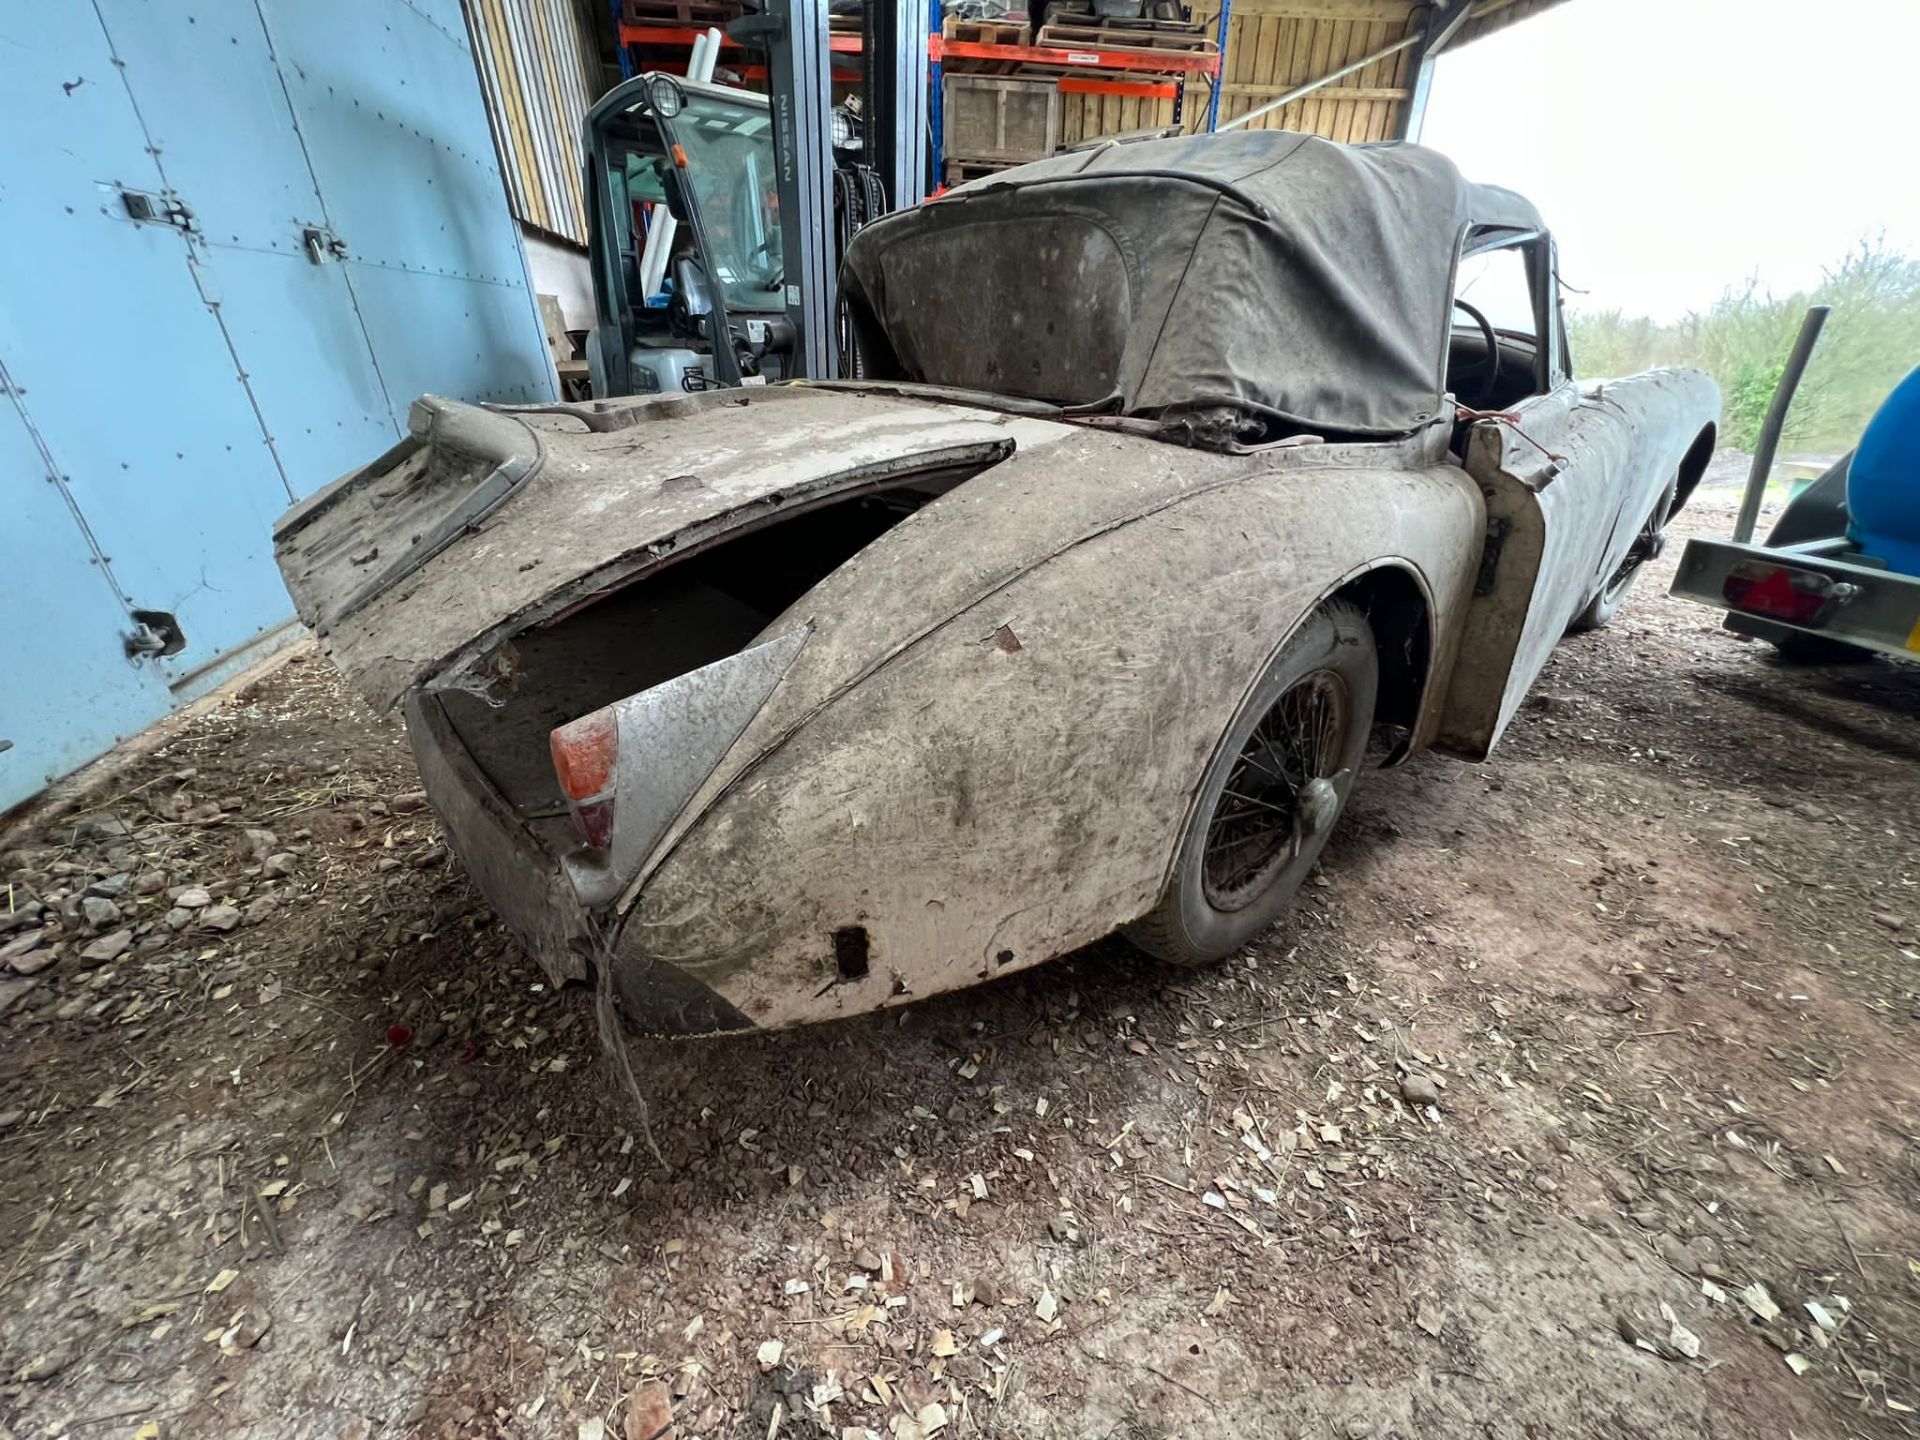 Jaguar XK150 3.4 Drop Head Coupe 1958 Barn Find. Matching numbers. - Image 5 of 30